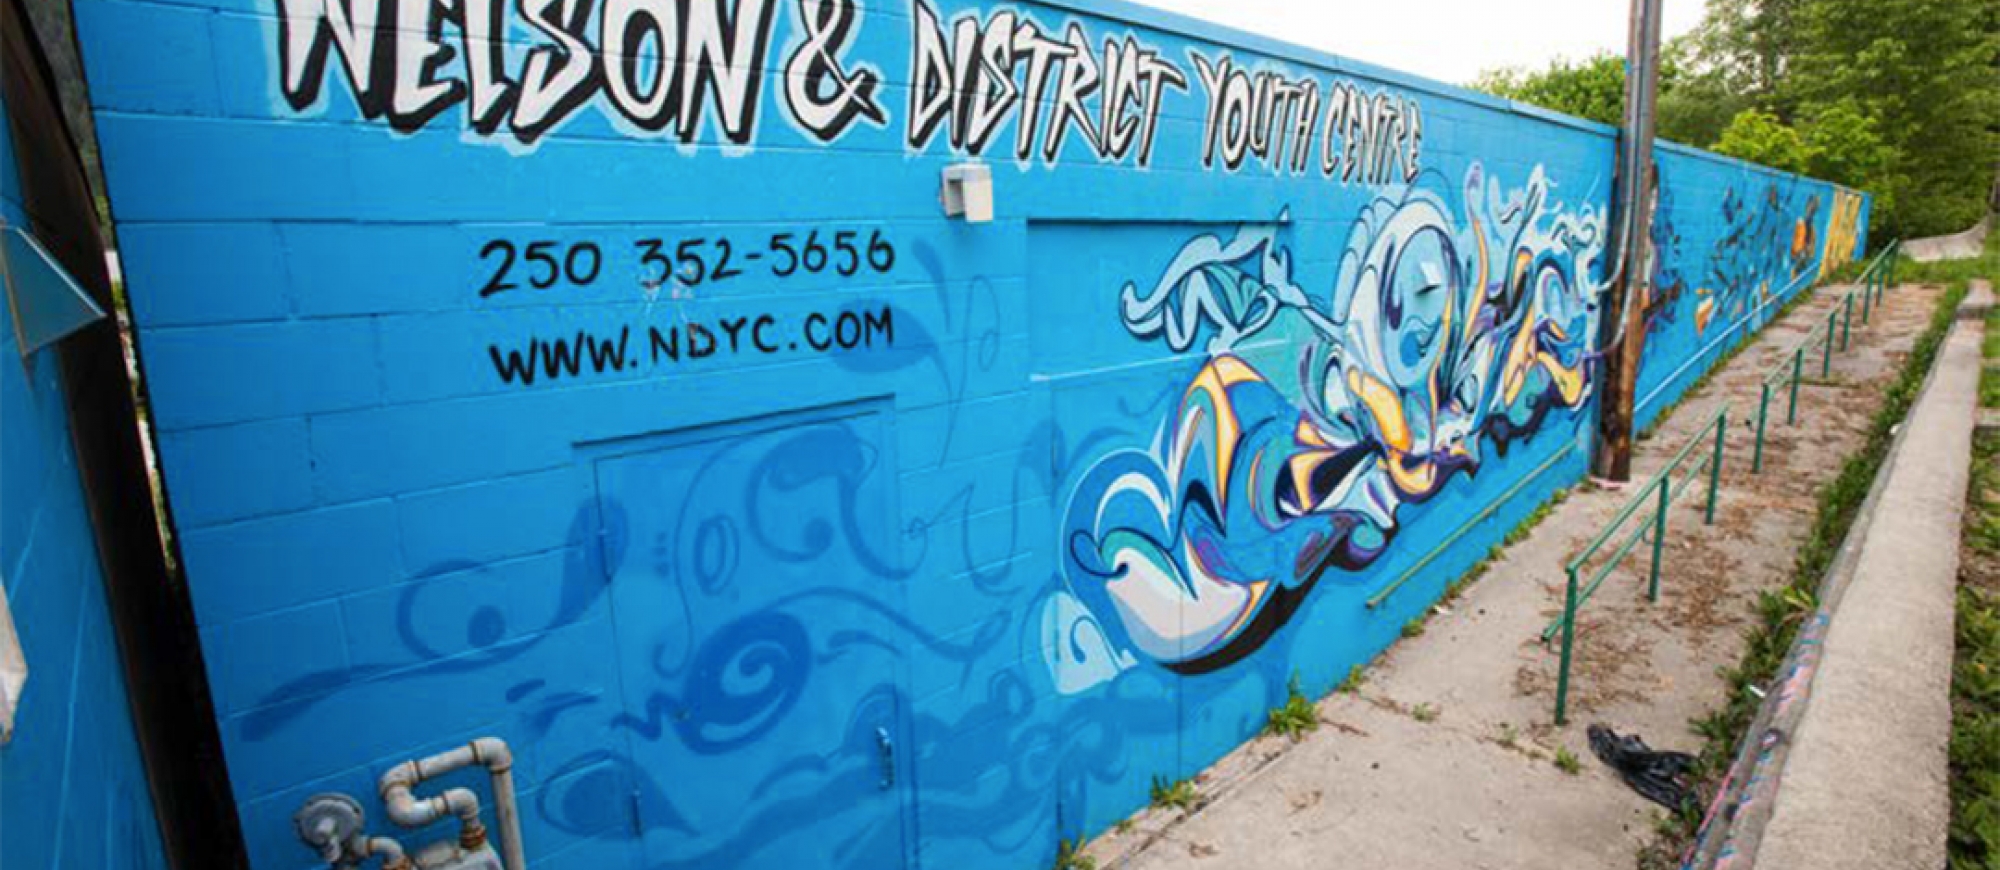 Nelson & District Youth Centre Mural